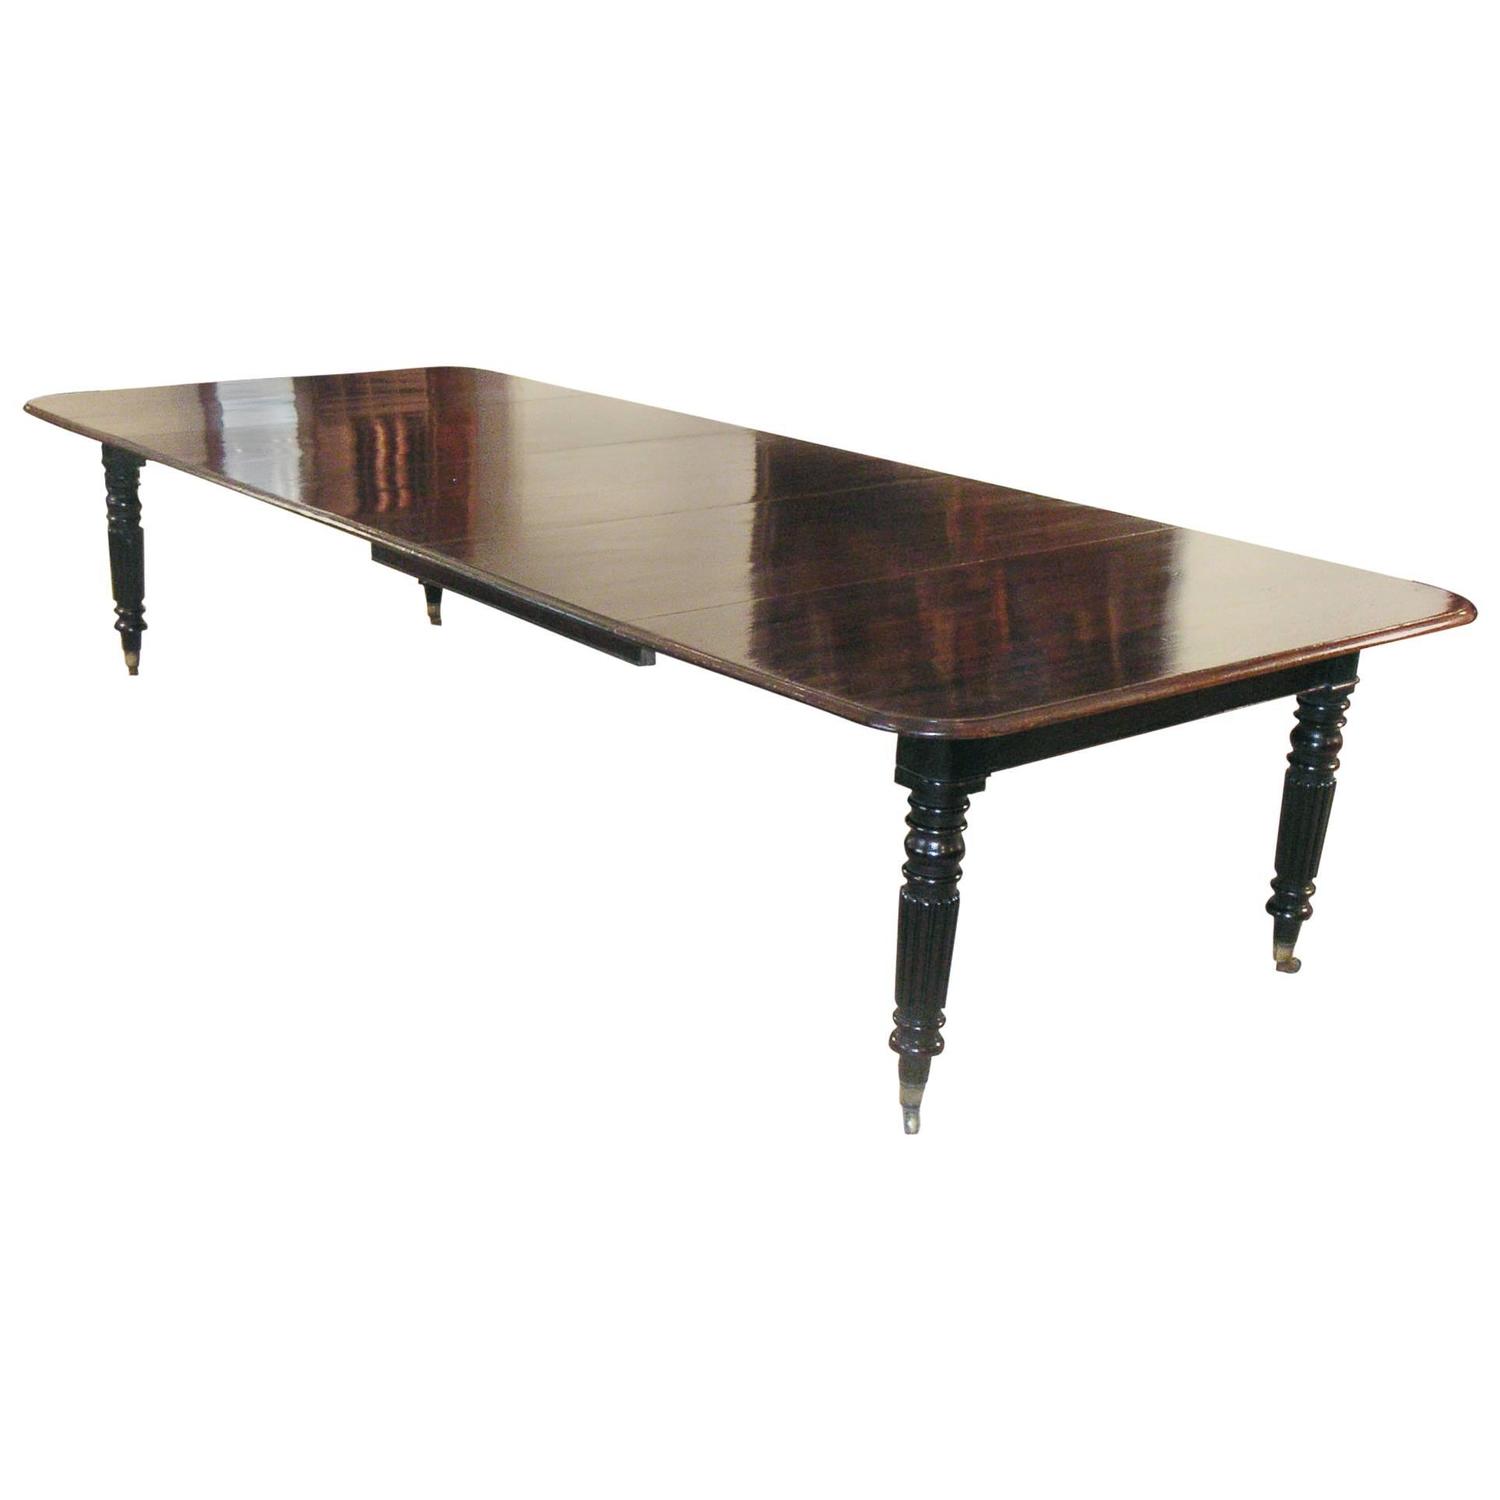 Mahogany Extending Dining Table to Seat 1014 For Sale at 